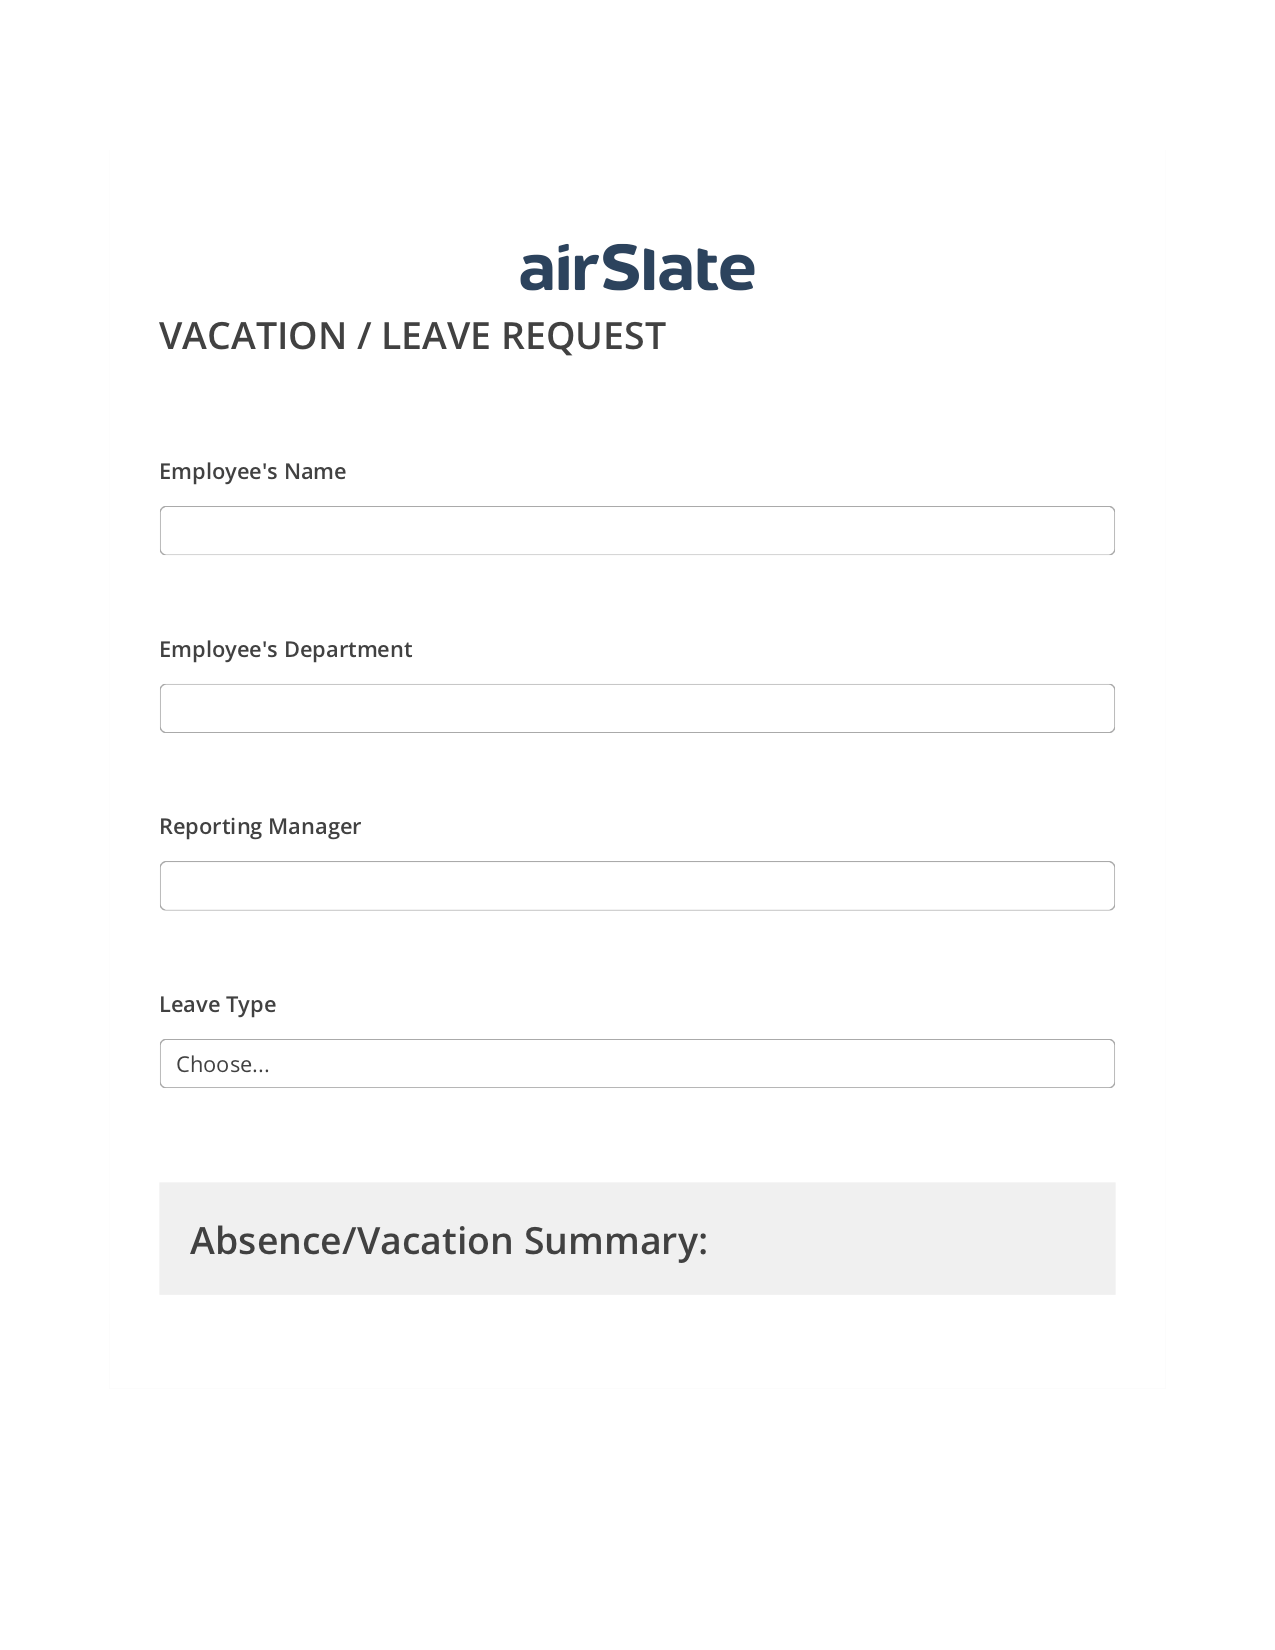 Vacation/Leave Request Workflow Pre-fill from Excel Spreadsheet Bot, Create QuickBooks Invoice Bot, Archive to SharePoint Folder Bot